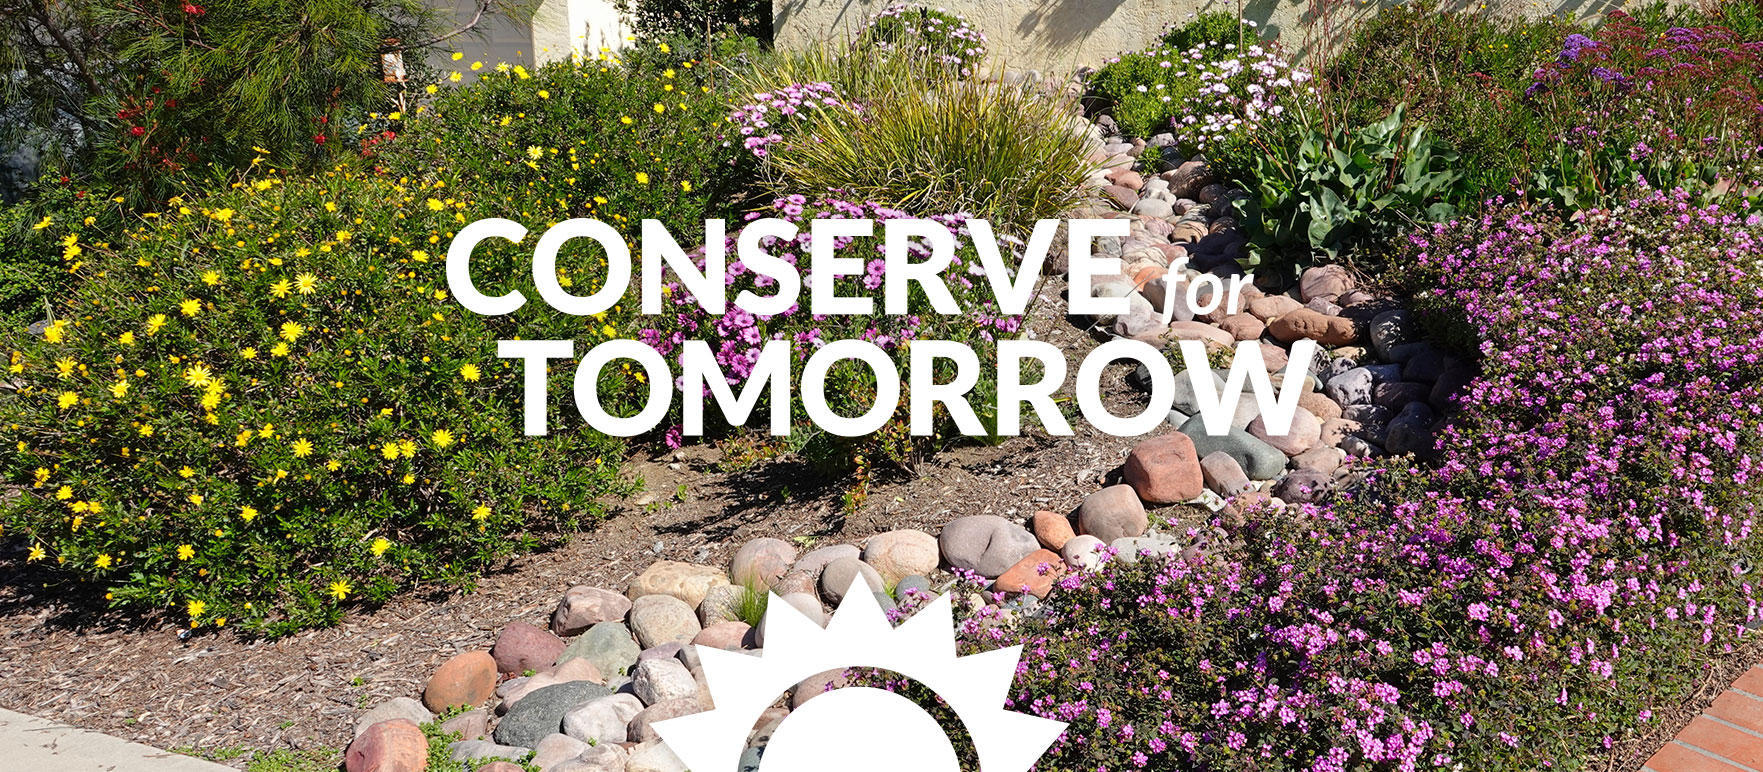 Conserve for tomorrow